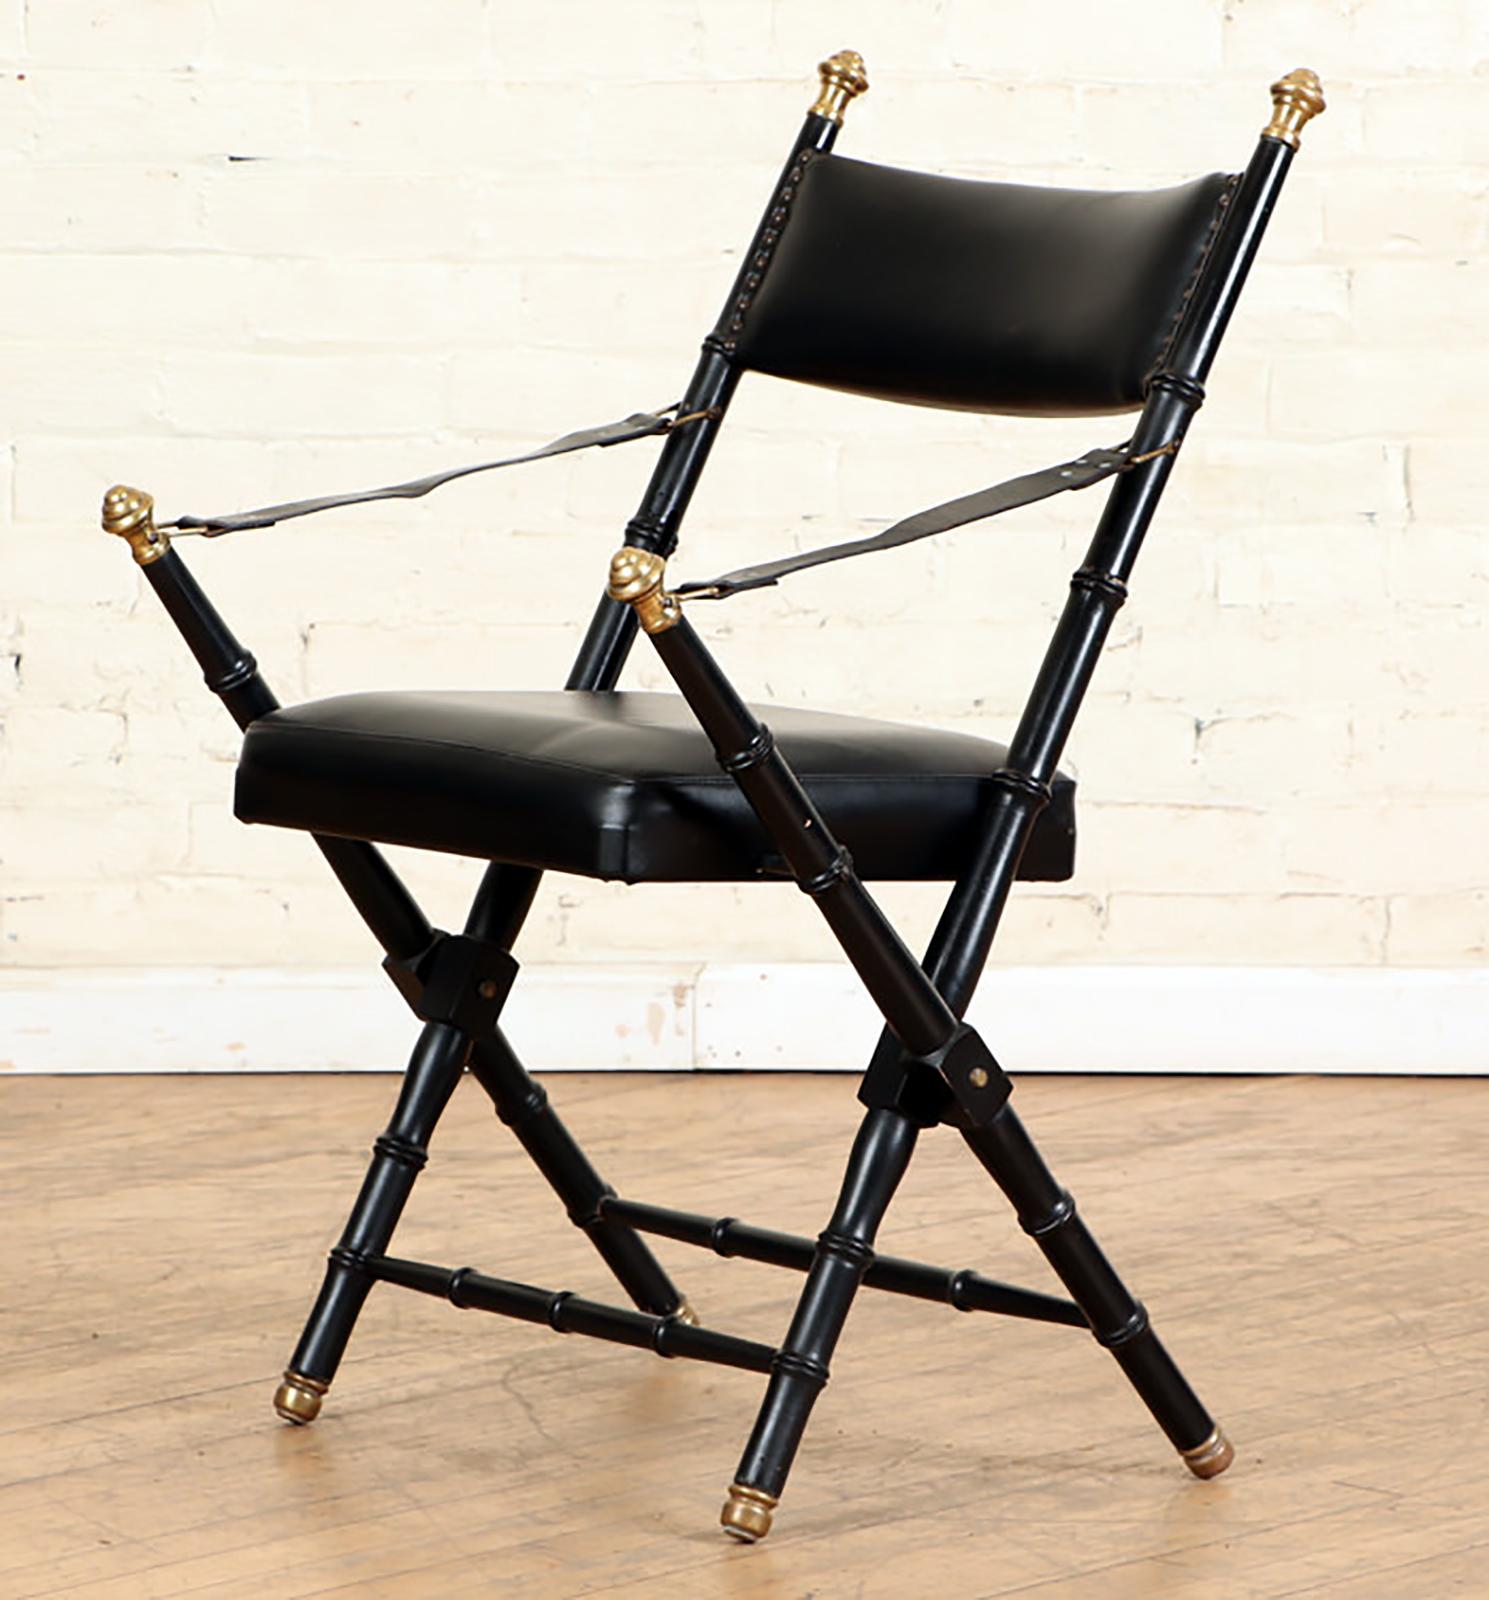 Pair of French Campaign-Style Folding Chairs with Faux-Bamboo Frames.
Two sets of the pair are available.